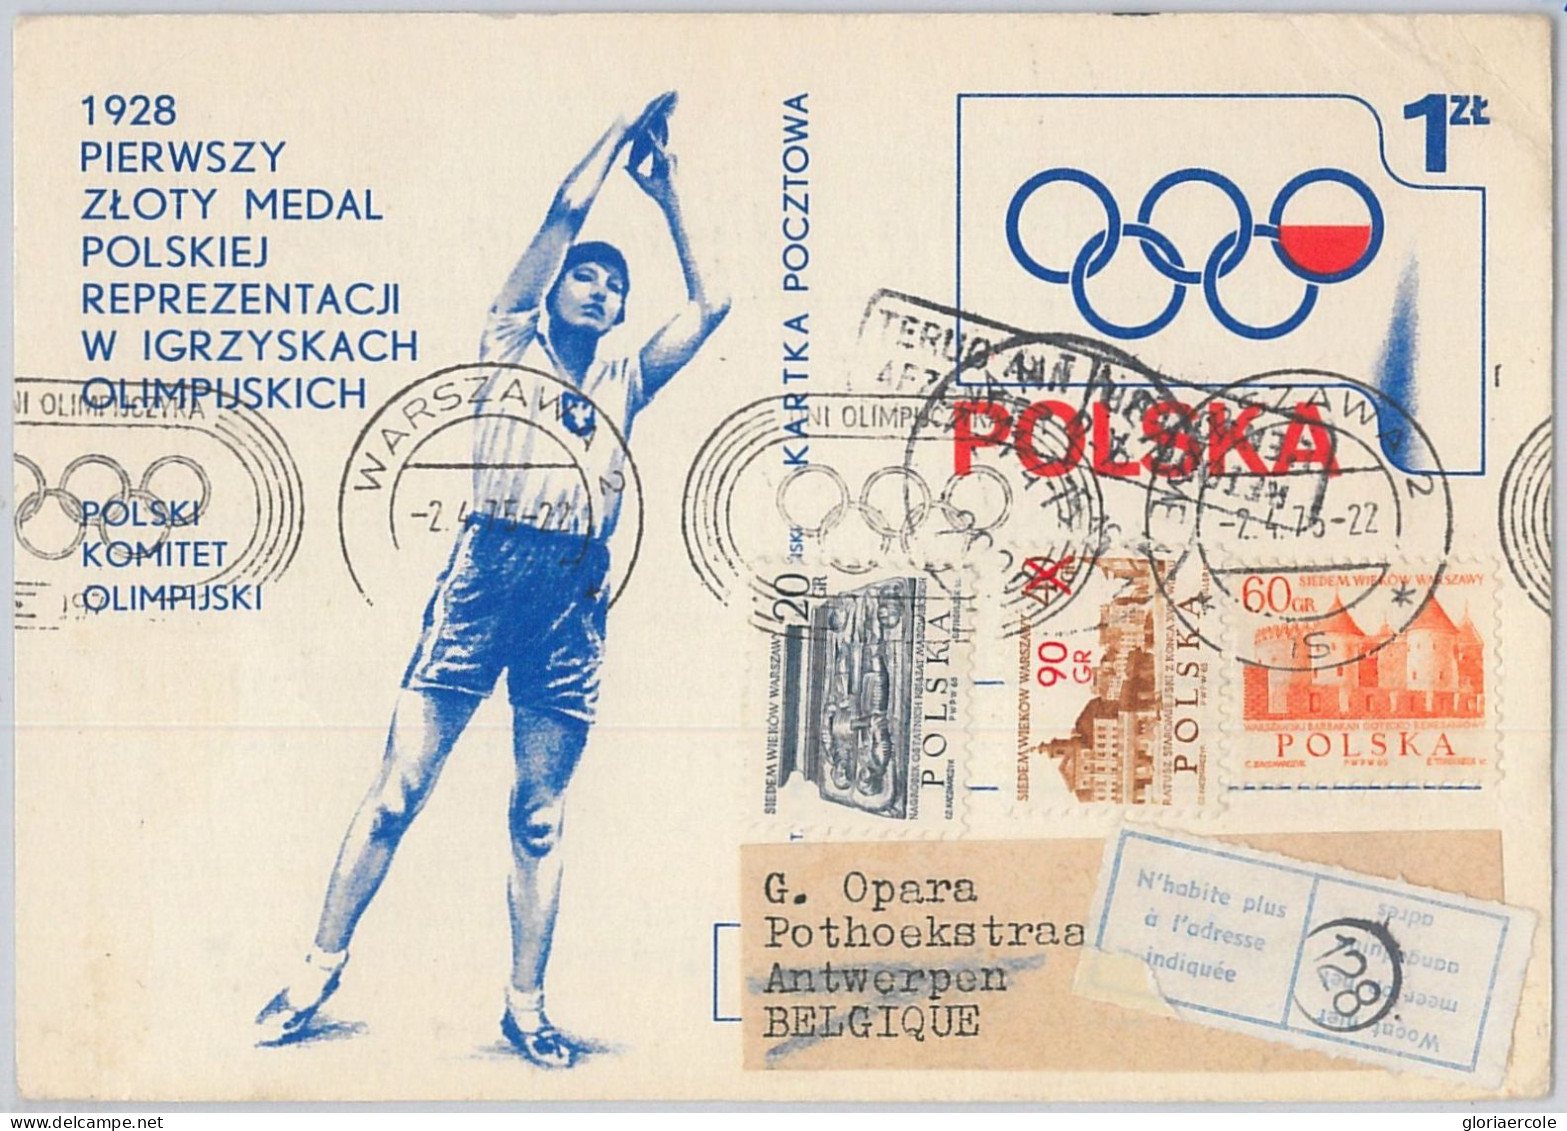 51131 - POLAND - POSTAL HISTORY -  STATIONERY 1978 OLYMPIC Games Disk Throwing - Sommer 1928: Amsterdam